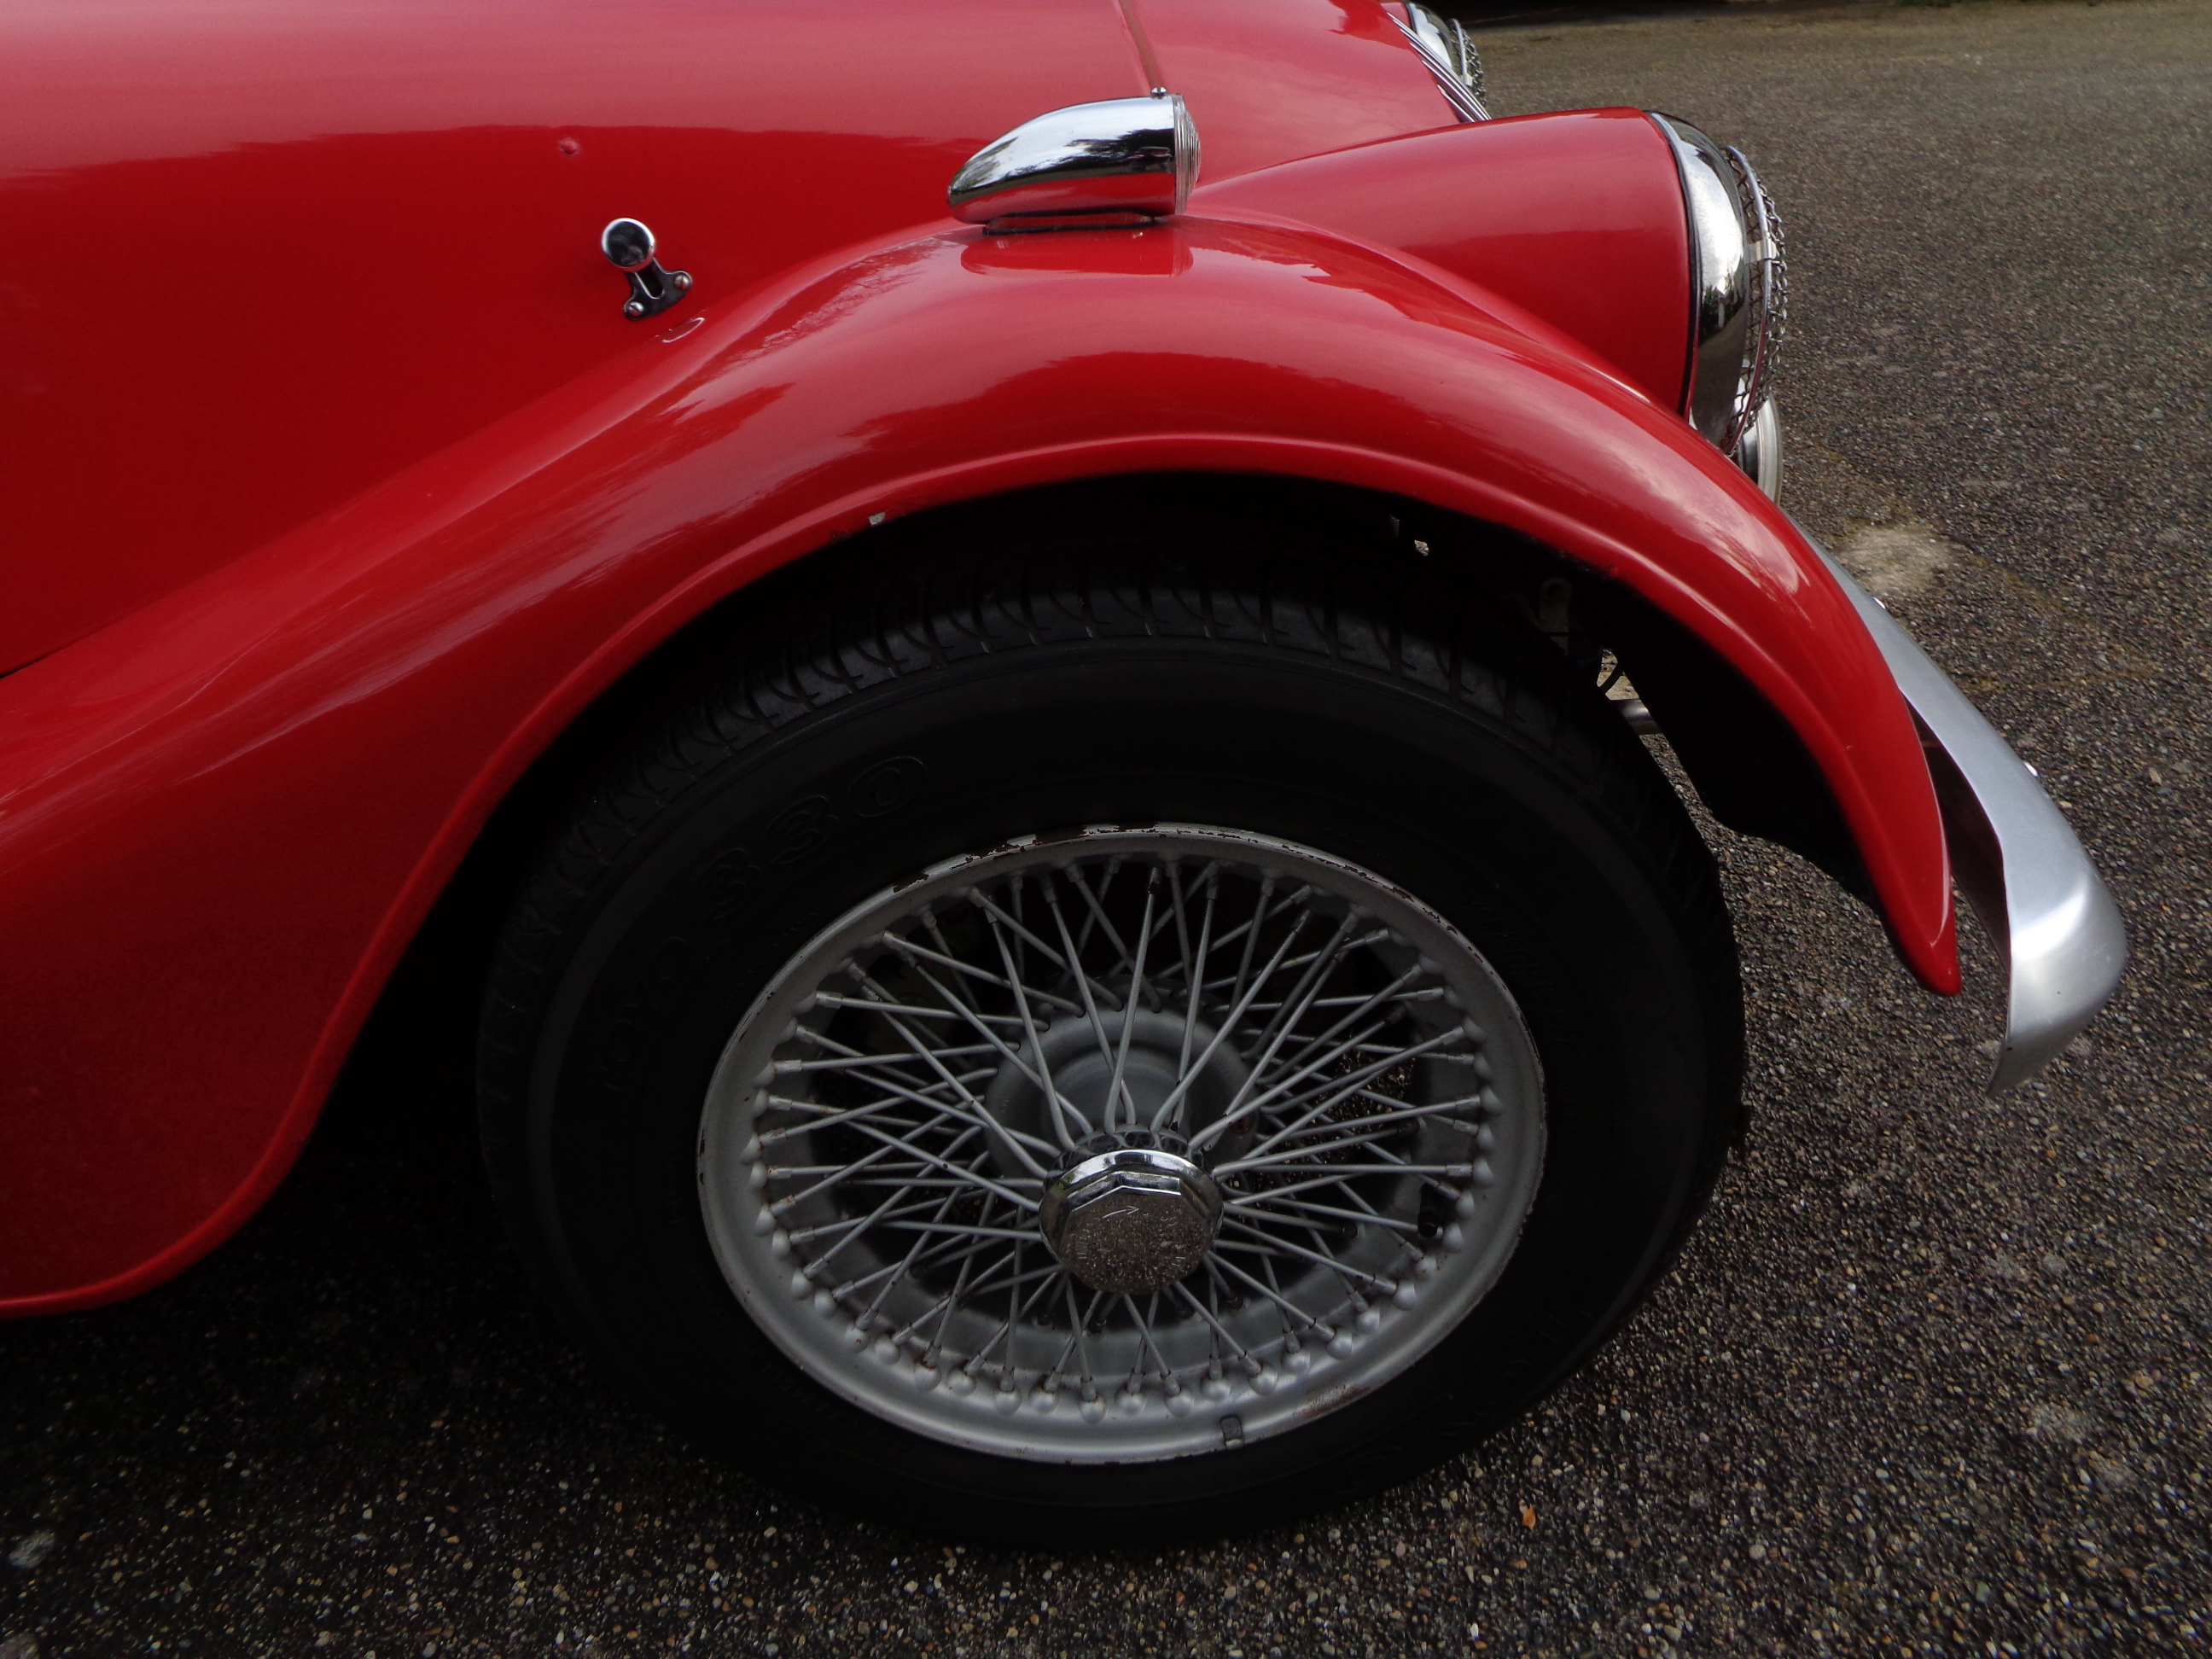 1983 Morgan 4/4 - Un-mistakable style for the British car enthusiast - A true gentleman’s car! - Image 15 of 19